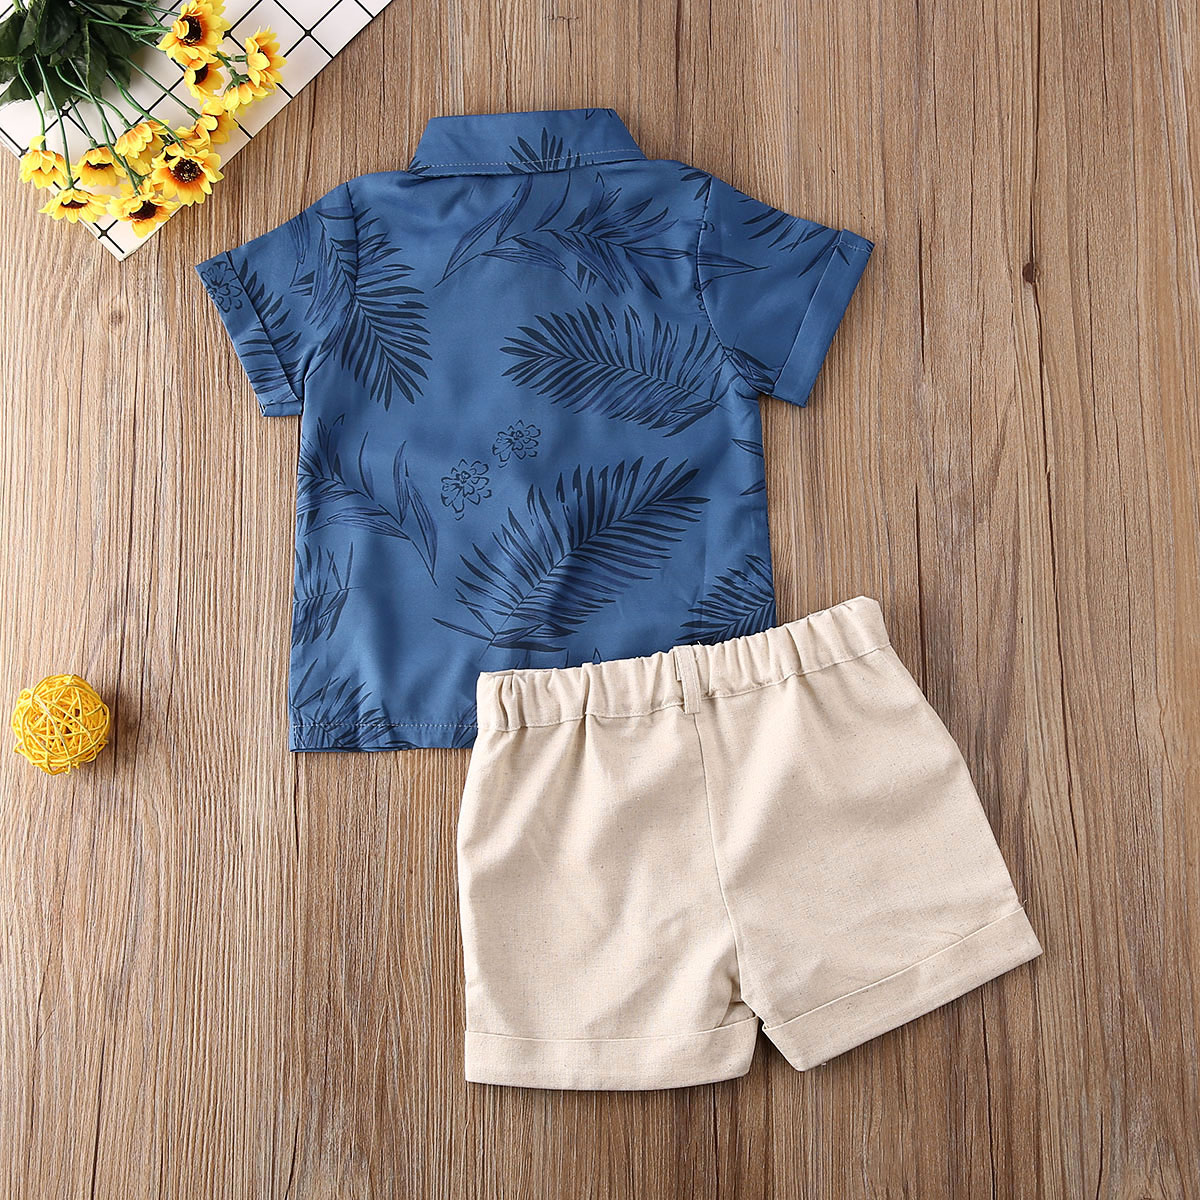 Pudcoco Toddler Baby Boy Clothes Leaf Print Short Sleeve Shirt Tops Short Pants 2Pcs Outfits Casual Clothes Summer